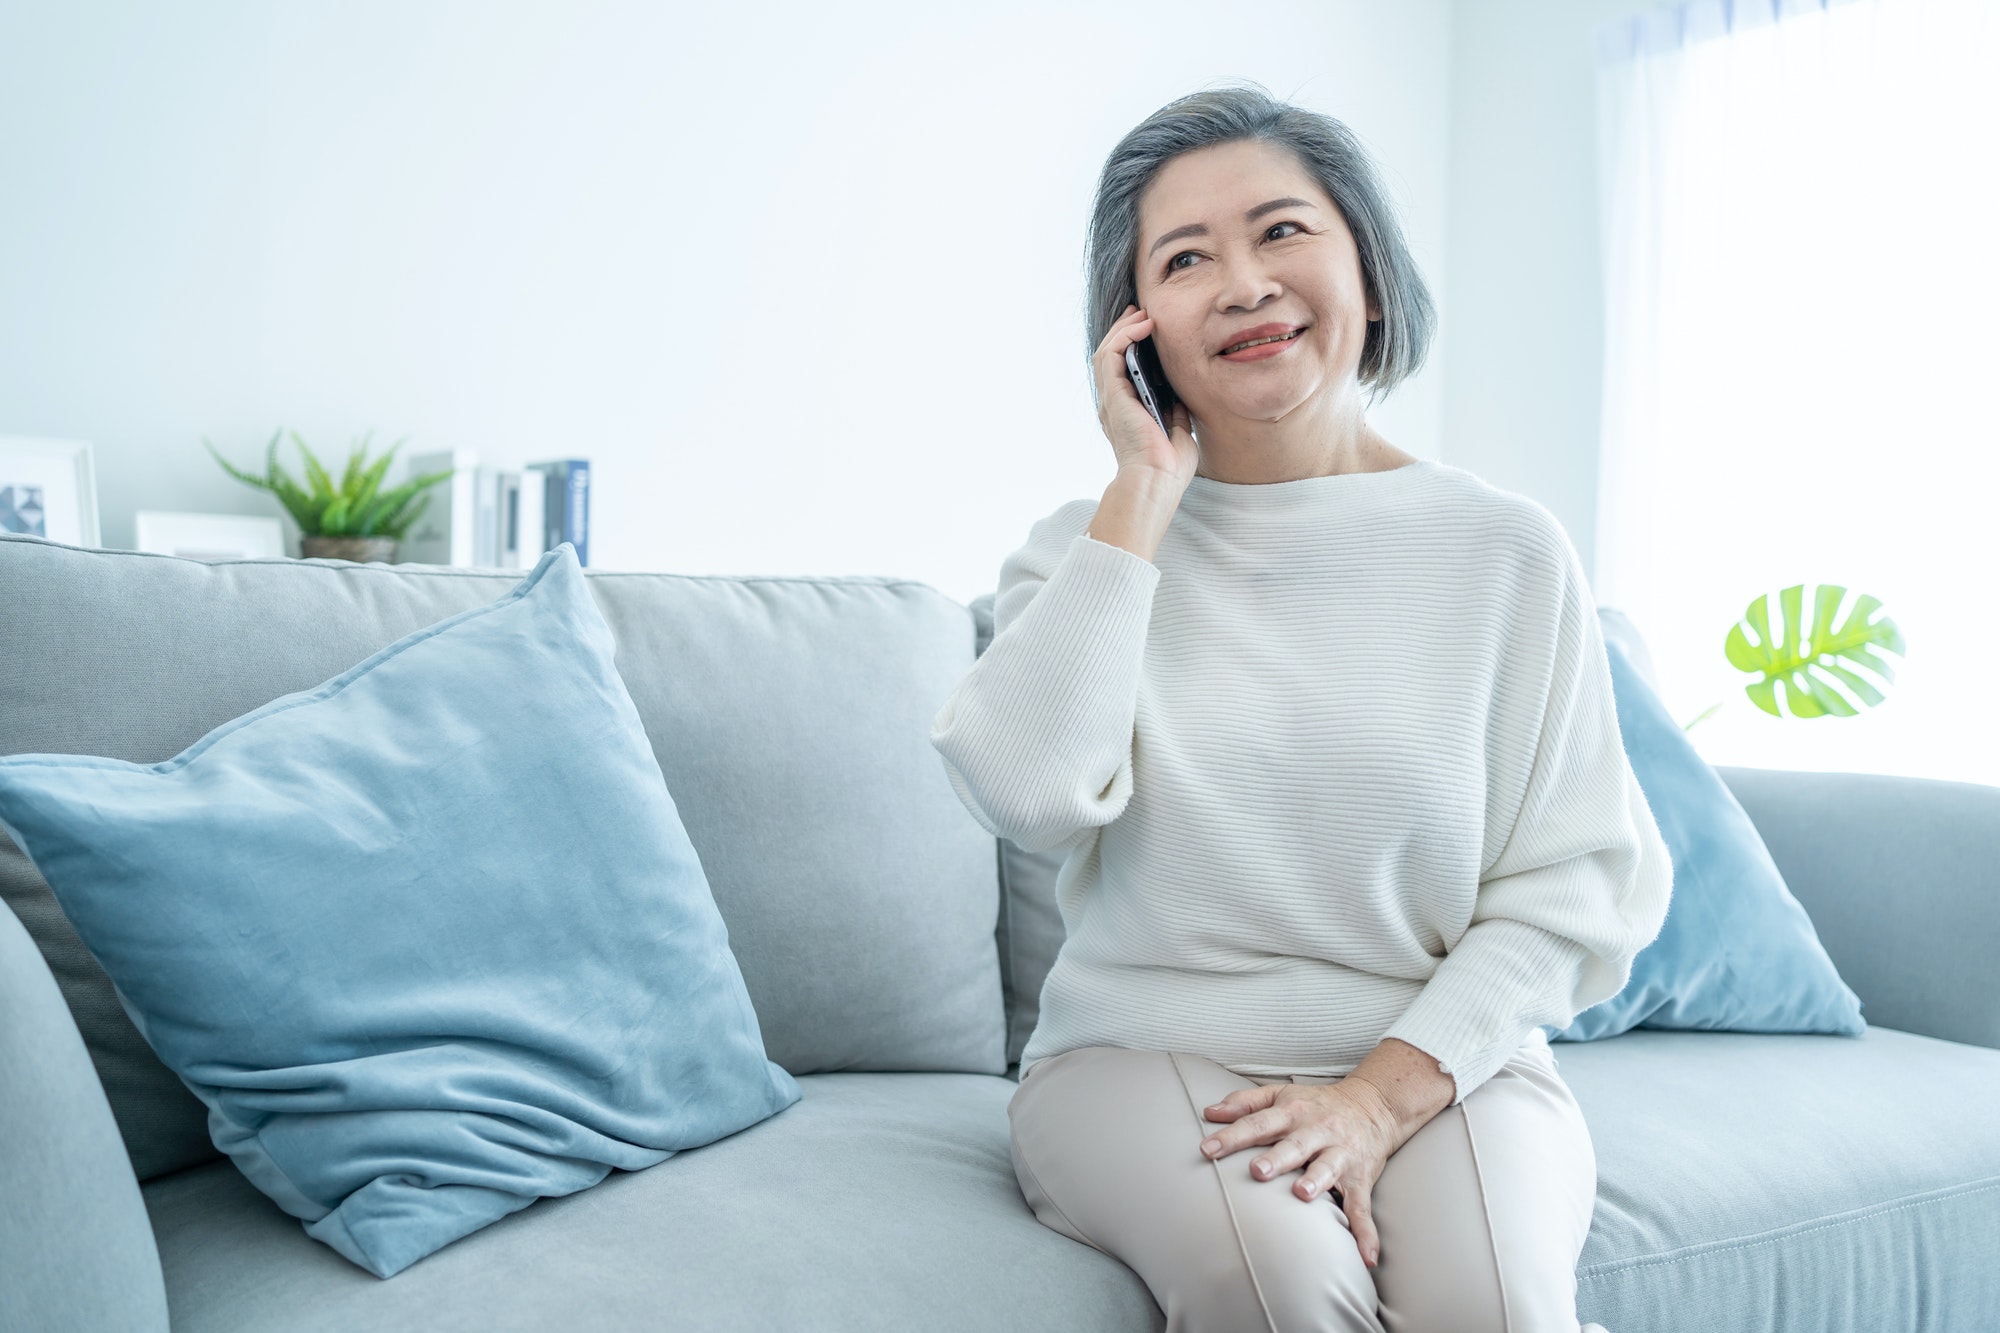 Asian senior elderly woman smile and talk on phone call in living room.